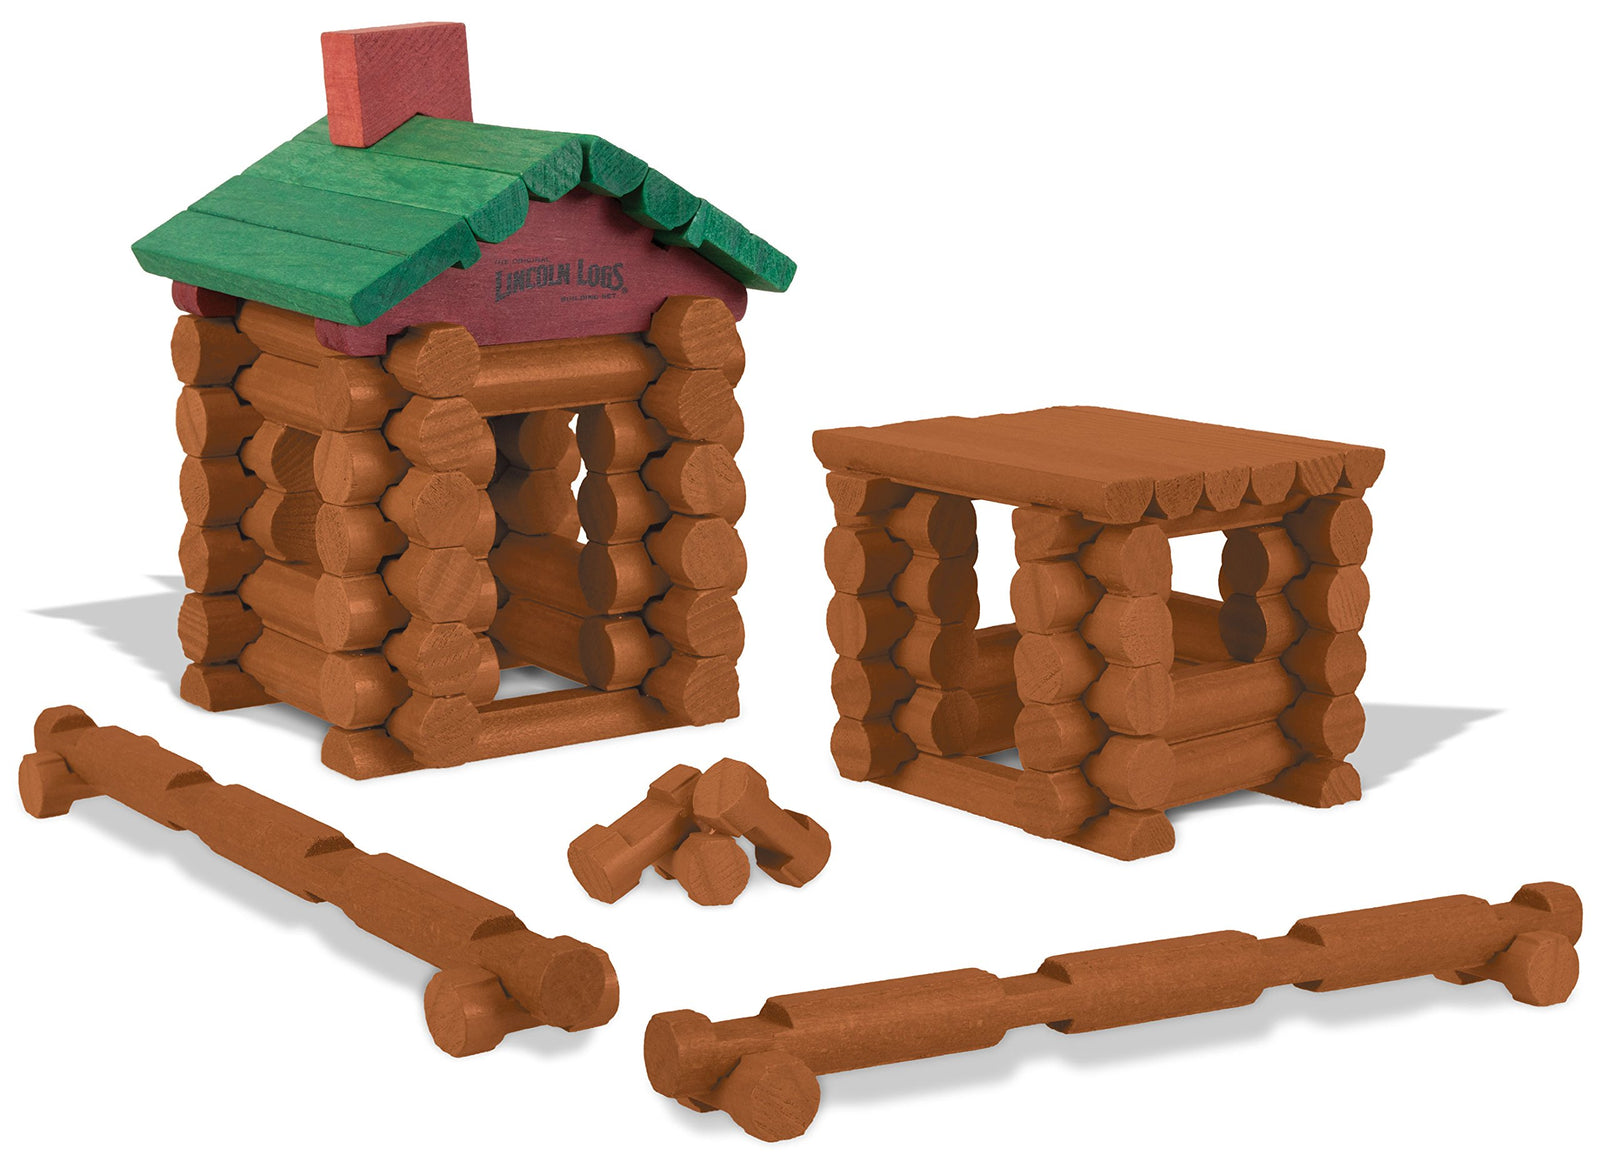 Lincoln Logs –100th Anniversary Tin-111 Pieces-Real Wood Logs-Ages 3+ - Best Retro Building Gift Set for Boys/Girls - Creative Construction Engineering – Top Blocks Game Kit - Preschool Education Toy, Brown (854)